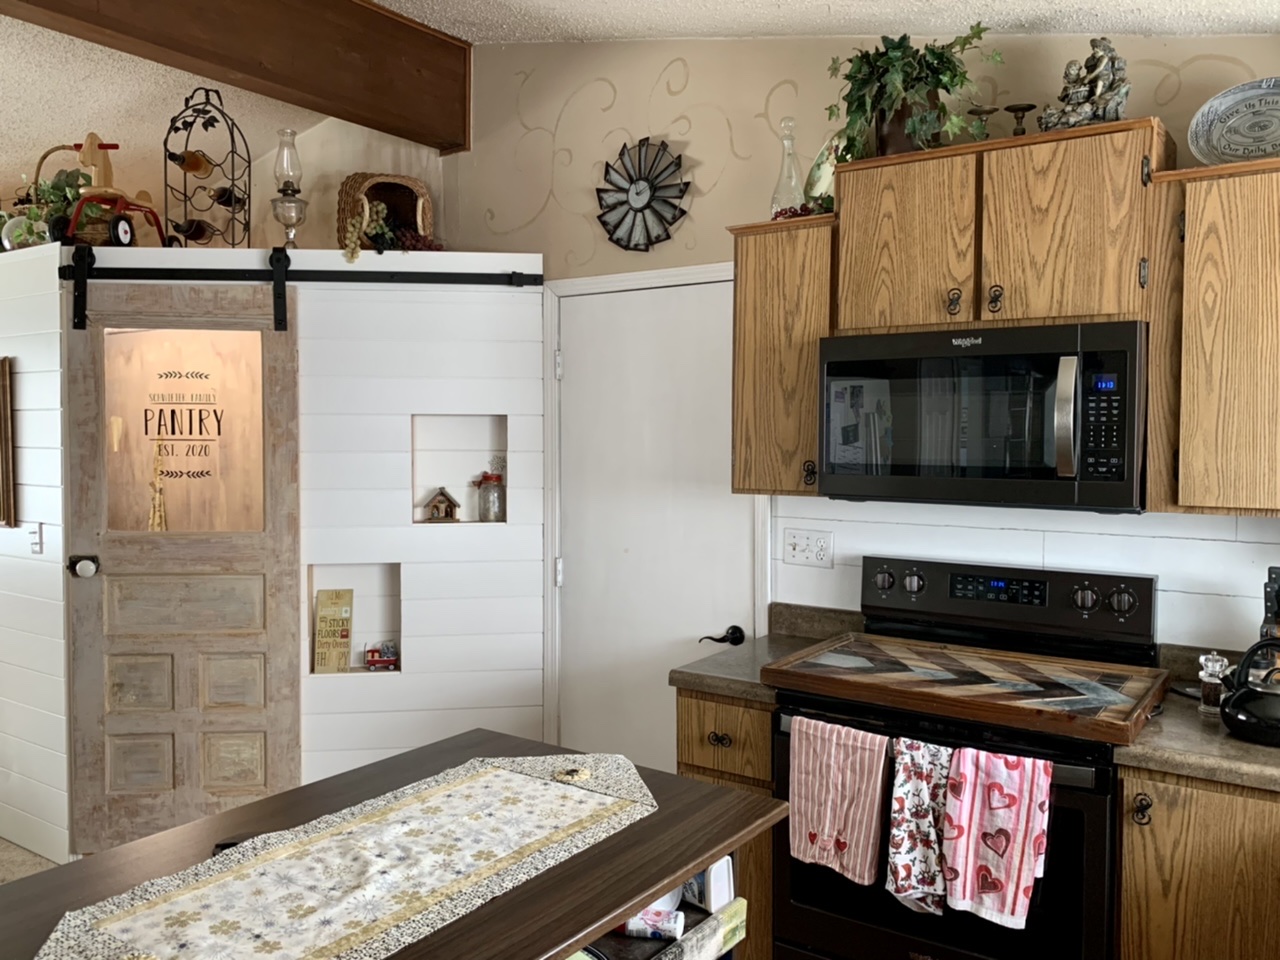 Easy Diy Pantry Addition Creates Storage A More Open Floor Plan And Cohesive Look